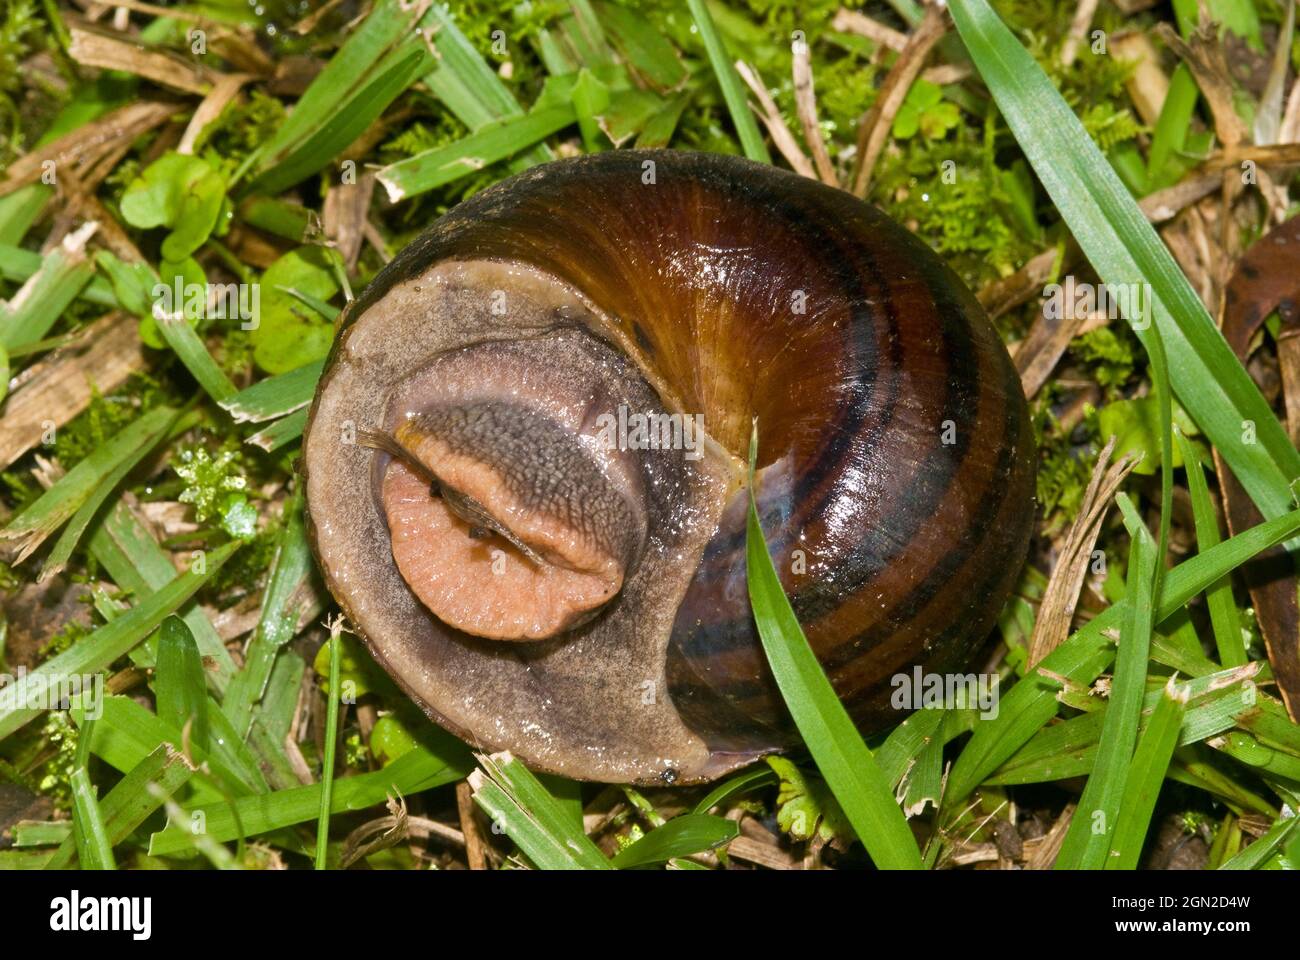 Giant panda snail (Hedleyella falconeri), This caryodid snail is Australia’s largest native land snail, with a shell growth of up to 9 or 10 cm. Stock Photo